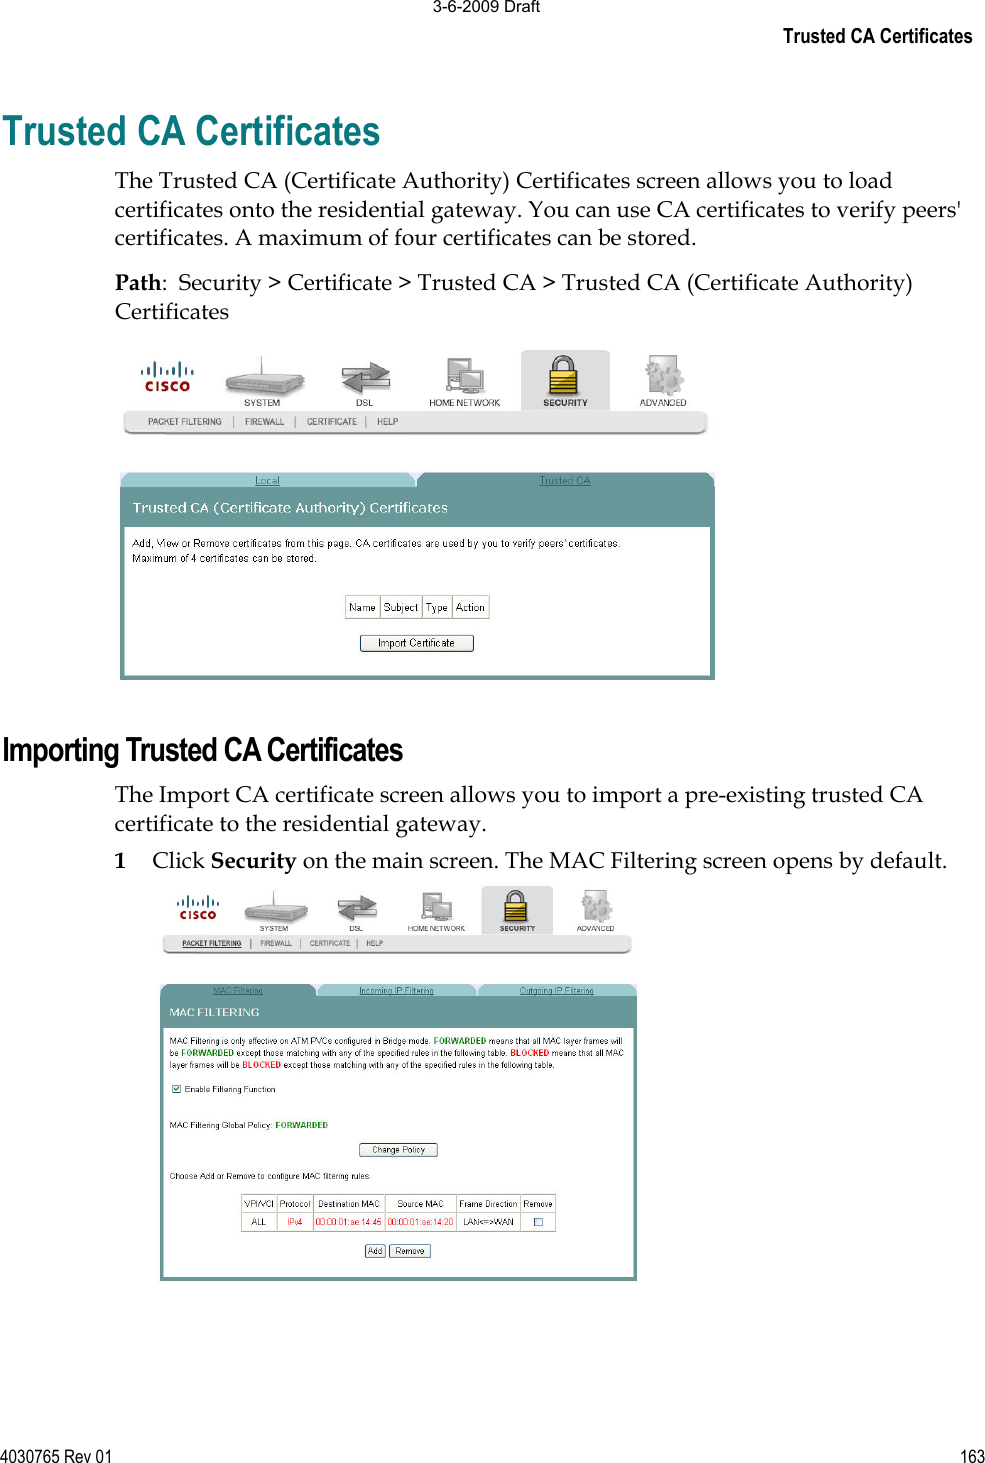 Trusted CA Certificates 4030765 Rev 01 163Trusted CA Certificates The Trusted CA (Certificate Authority) Certificates screen allows you to load certificates onto the residential gateway. You can use CA certificates to verify peers&apos; certificates. A maximum of four certificates can be stored.Path:  Security &gt; Certificate &gt; Trusted CA &gt; Trusted CA (Certificate Authority) Certificates Importing Trusted CA Certificates The Import CA certificate screen allows you to import a pre-existing trusted CA certificate to the residential gateway. 1Click Security on the main screen. The MAC Filtering screen opens by default. 3-6-2009 Draft